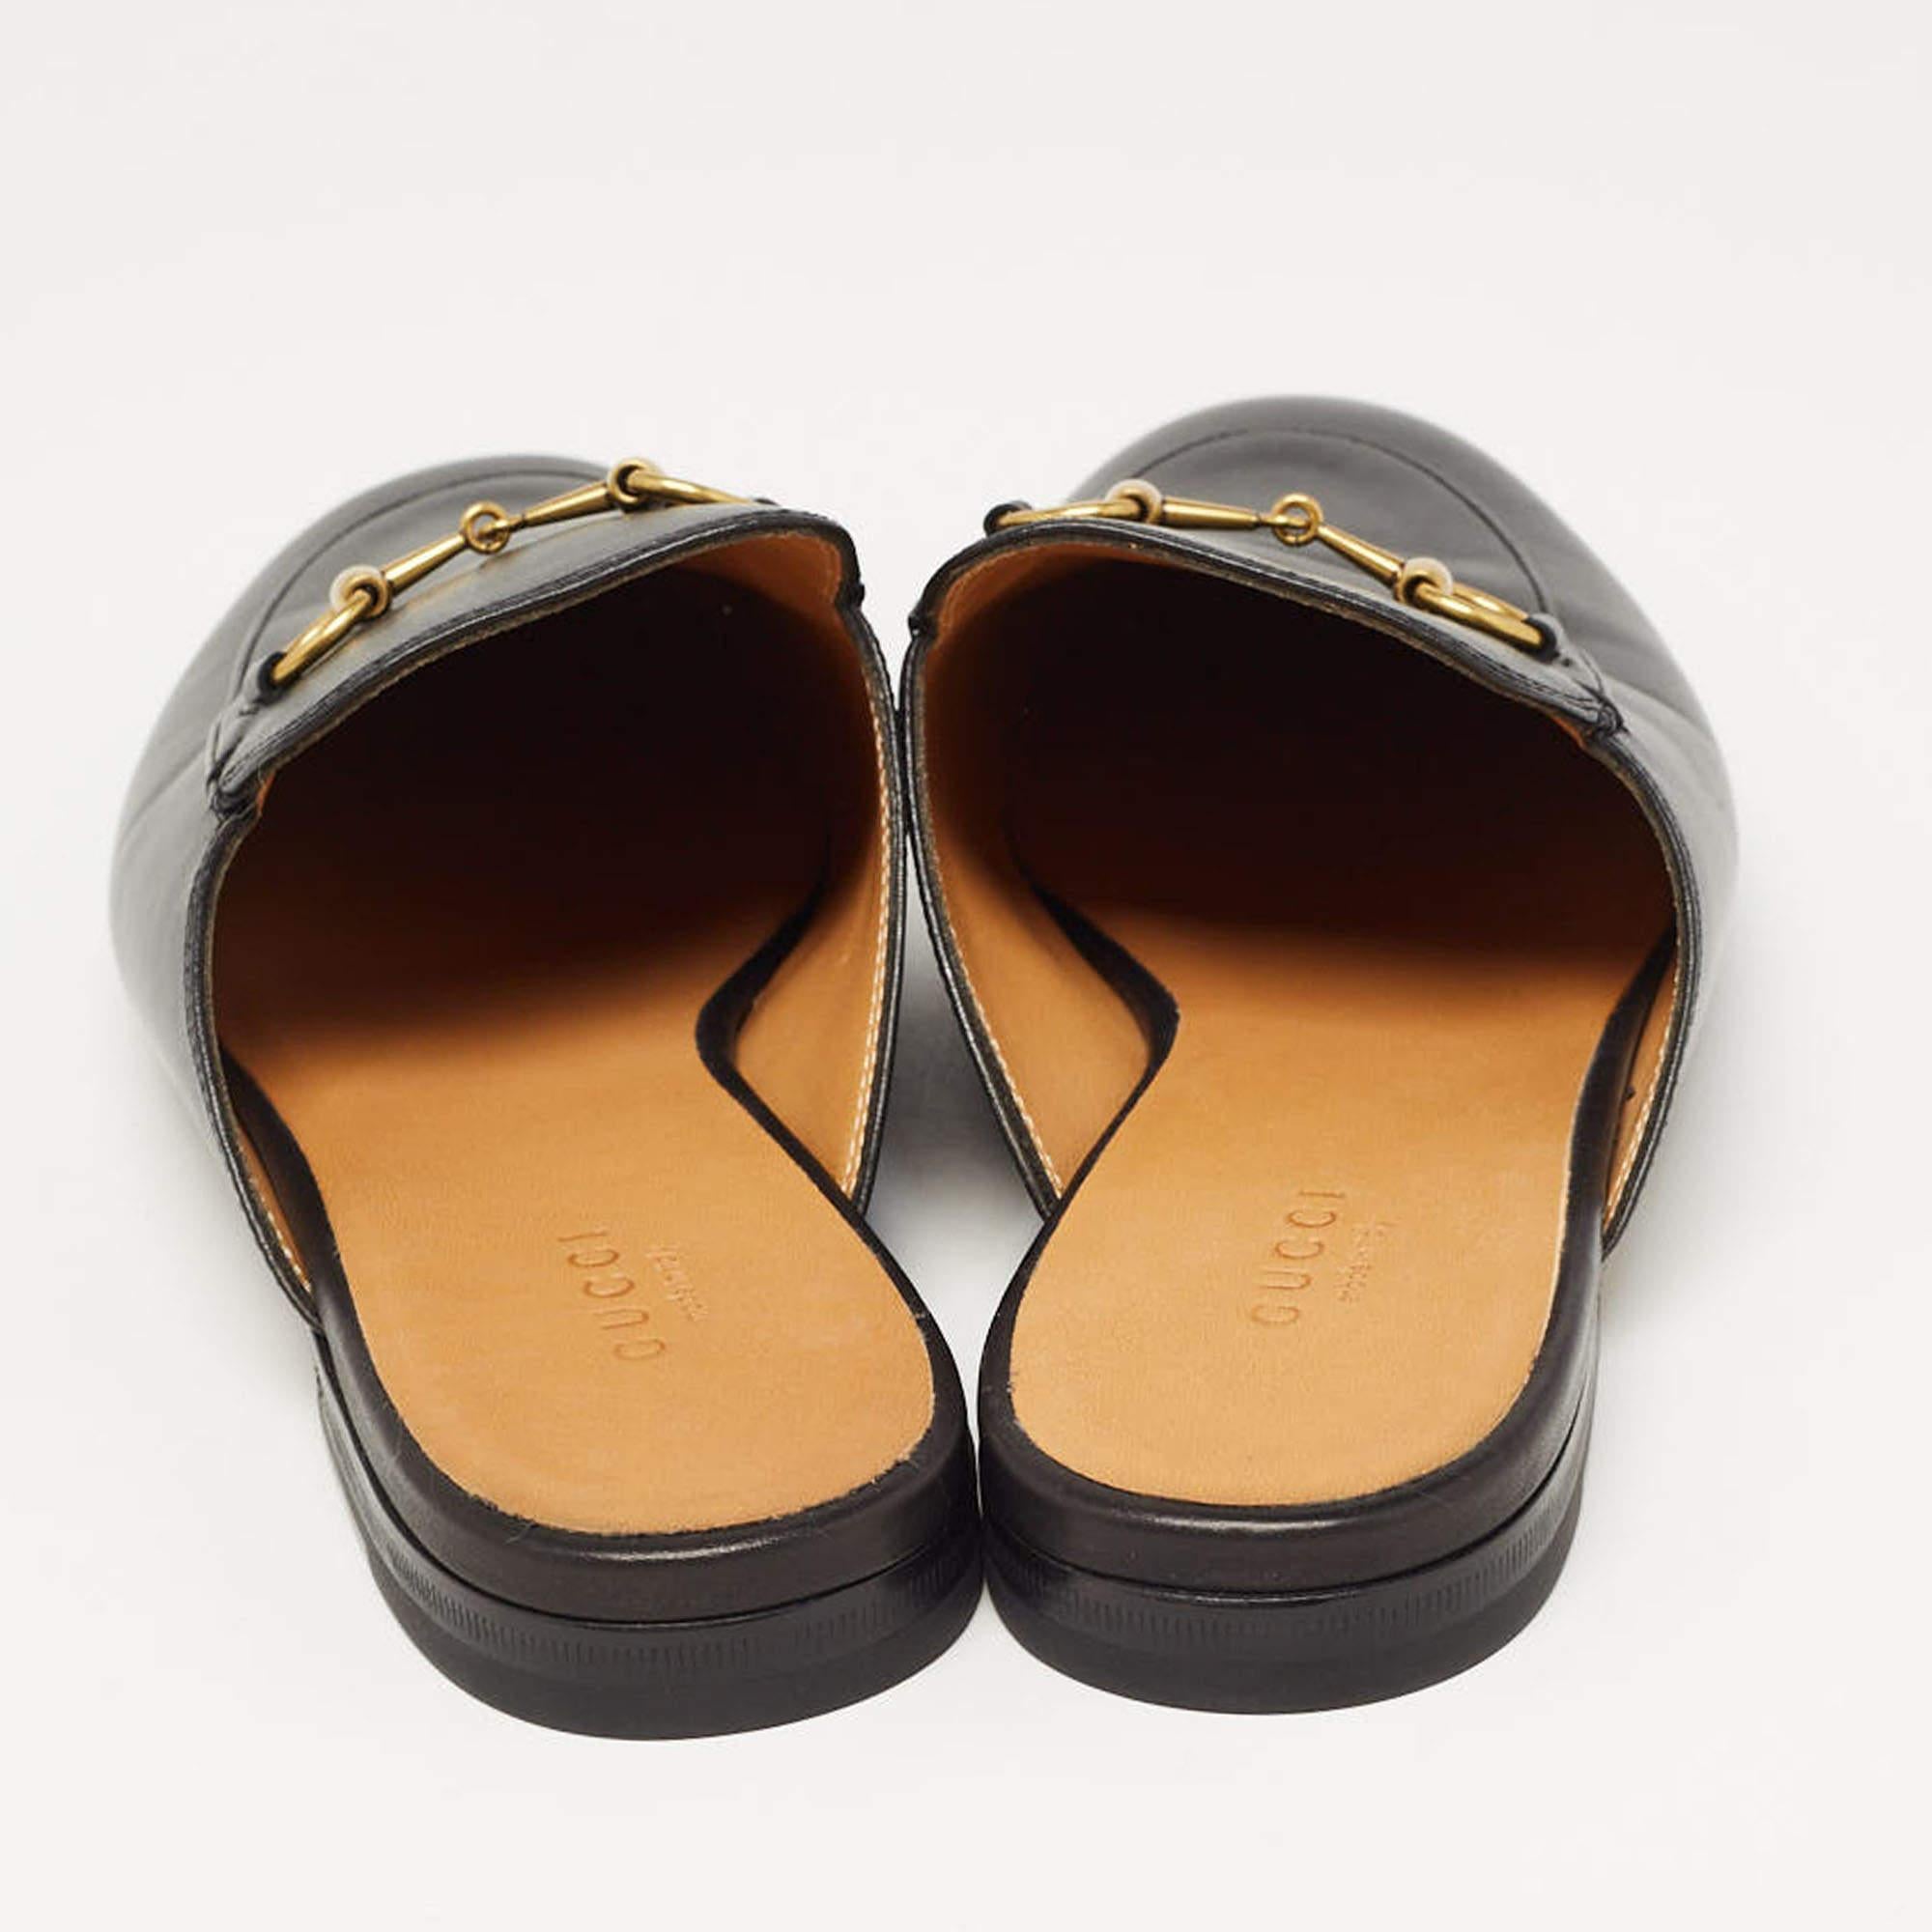 Gucci Black Leather Princetown Flat Mules Size 40 2